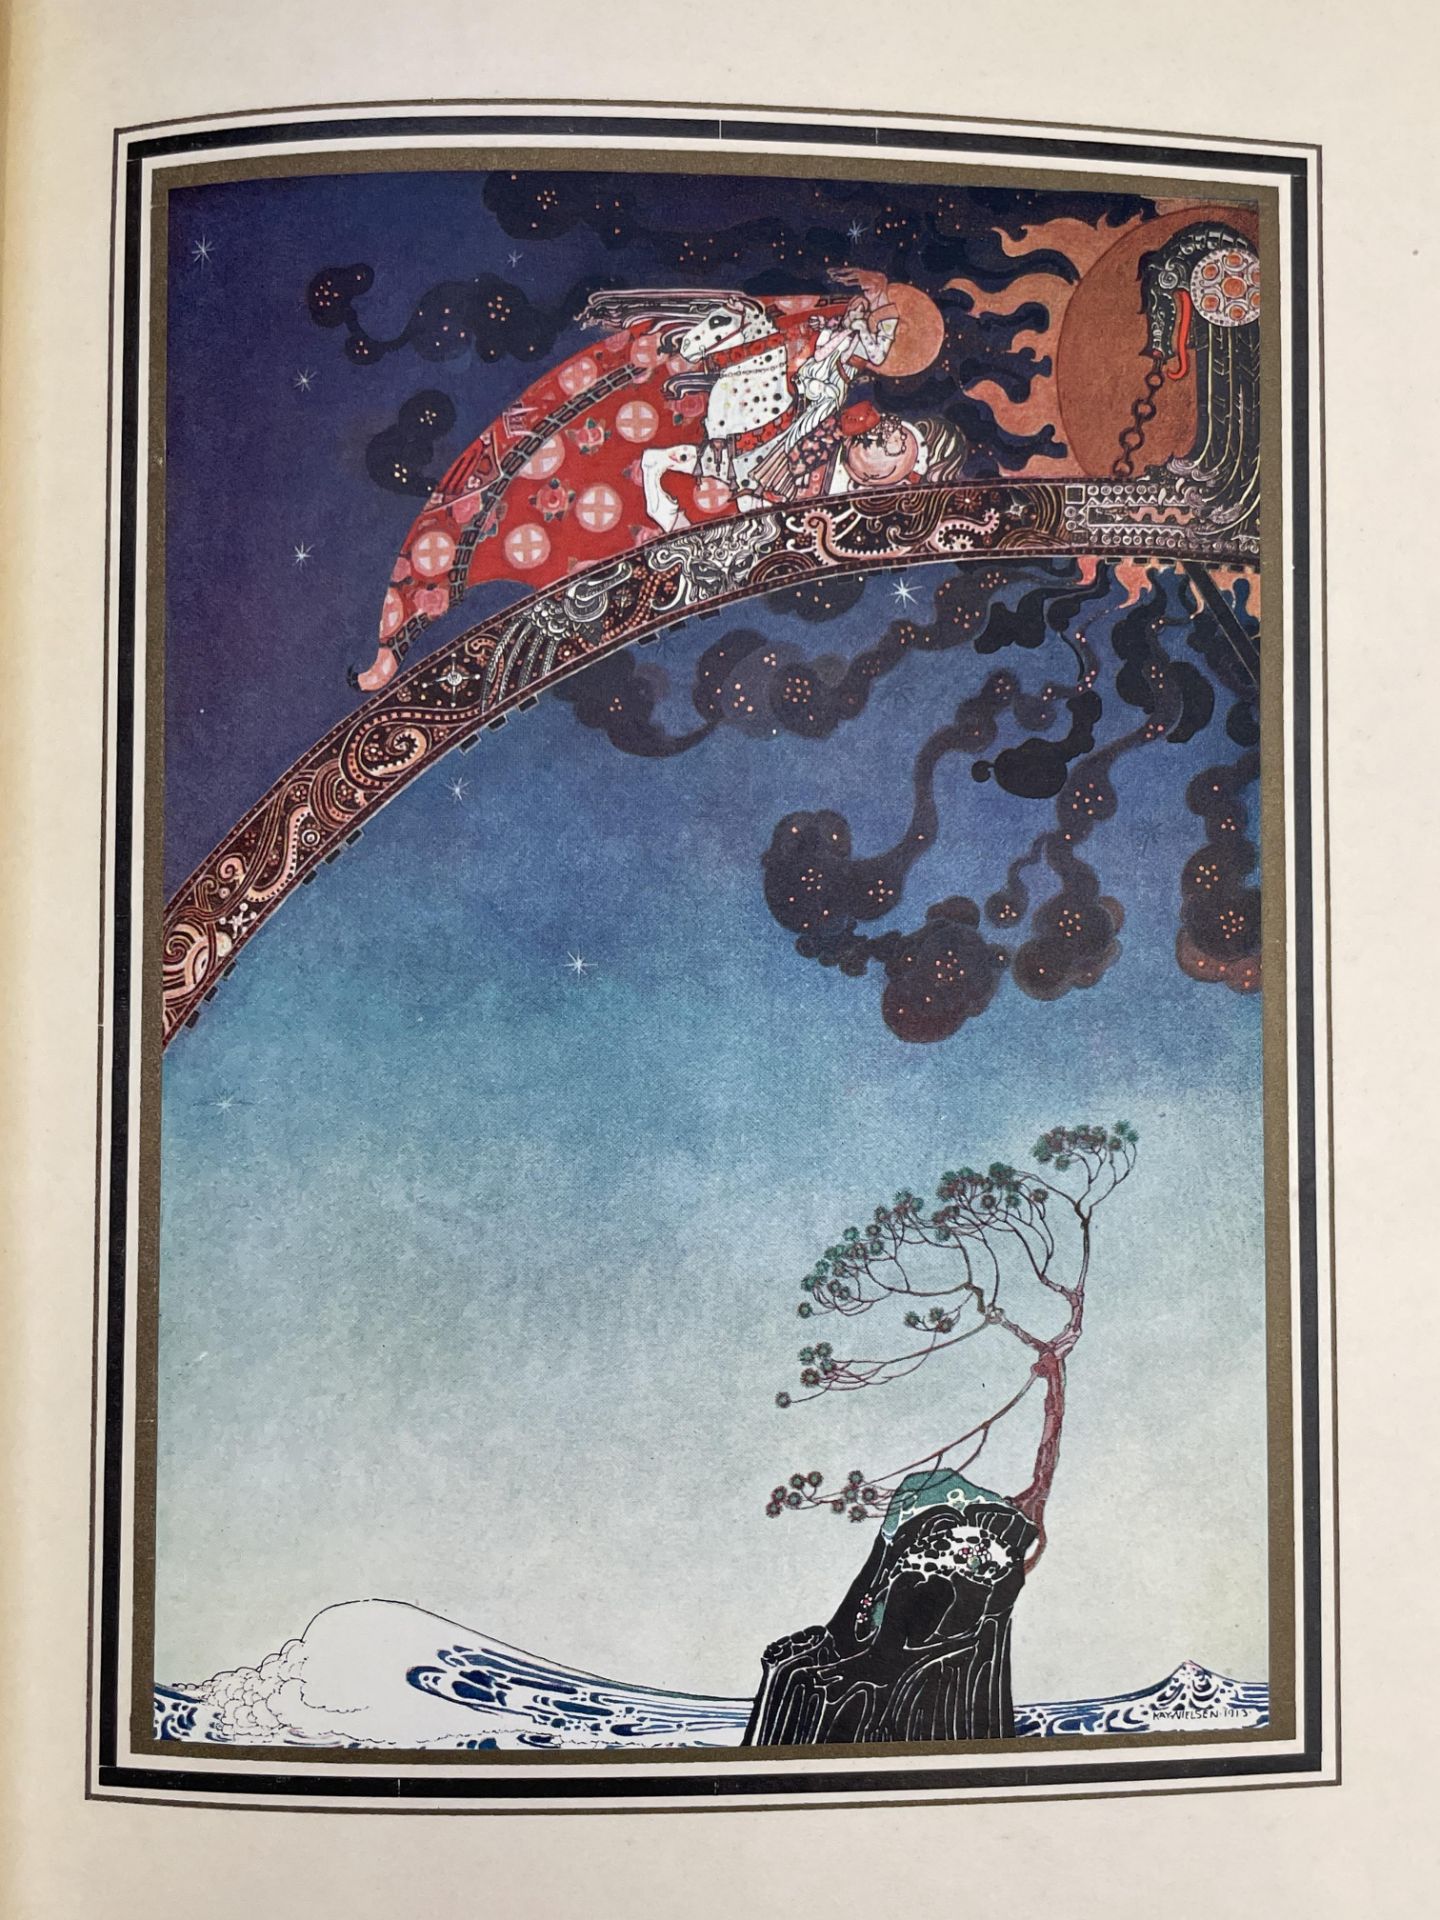 KAY NIELSEN ILLUSTRATIONS. 'East of the Sun and West of the Moon: Old Tales from the North.' - Image 6 of 29